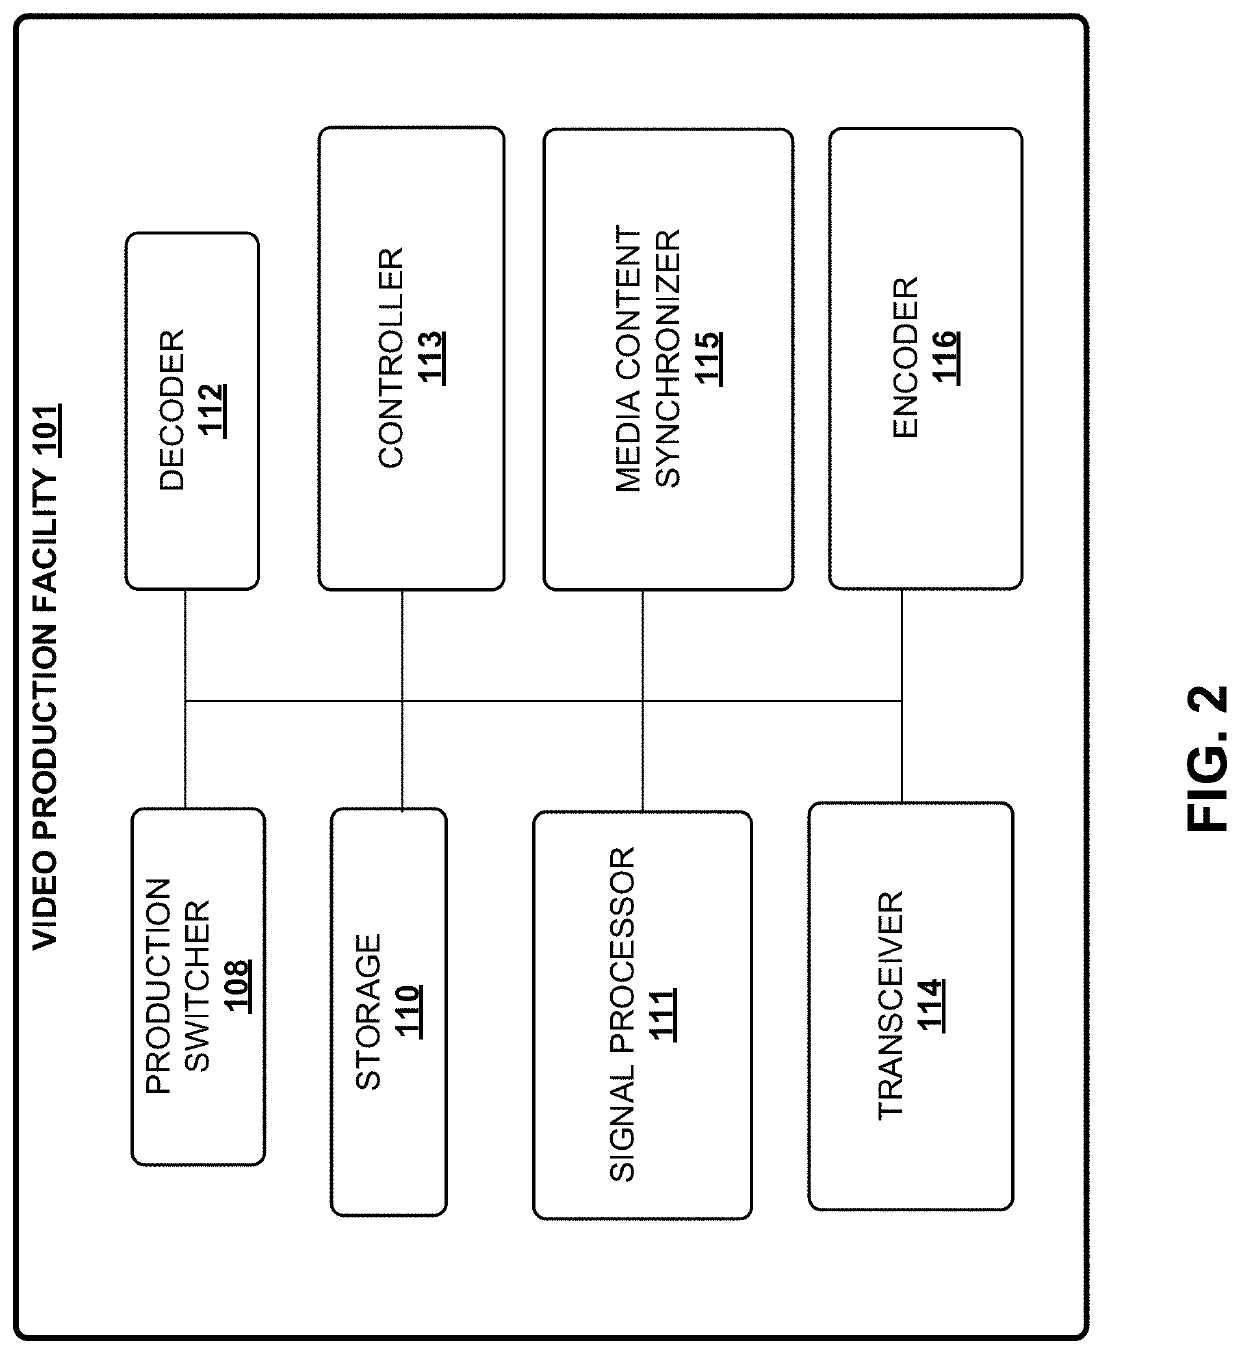 System and method for synchronizing transmission of media content using timestamps